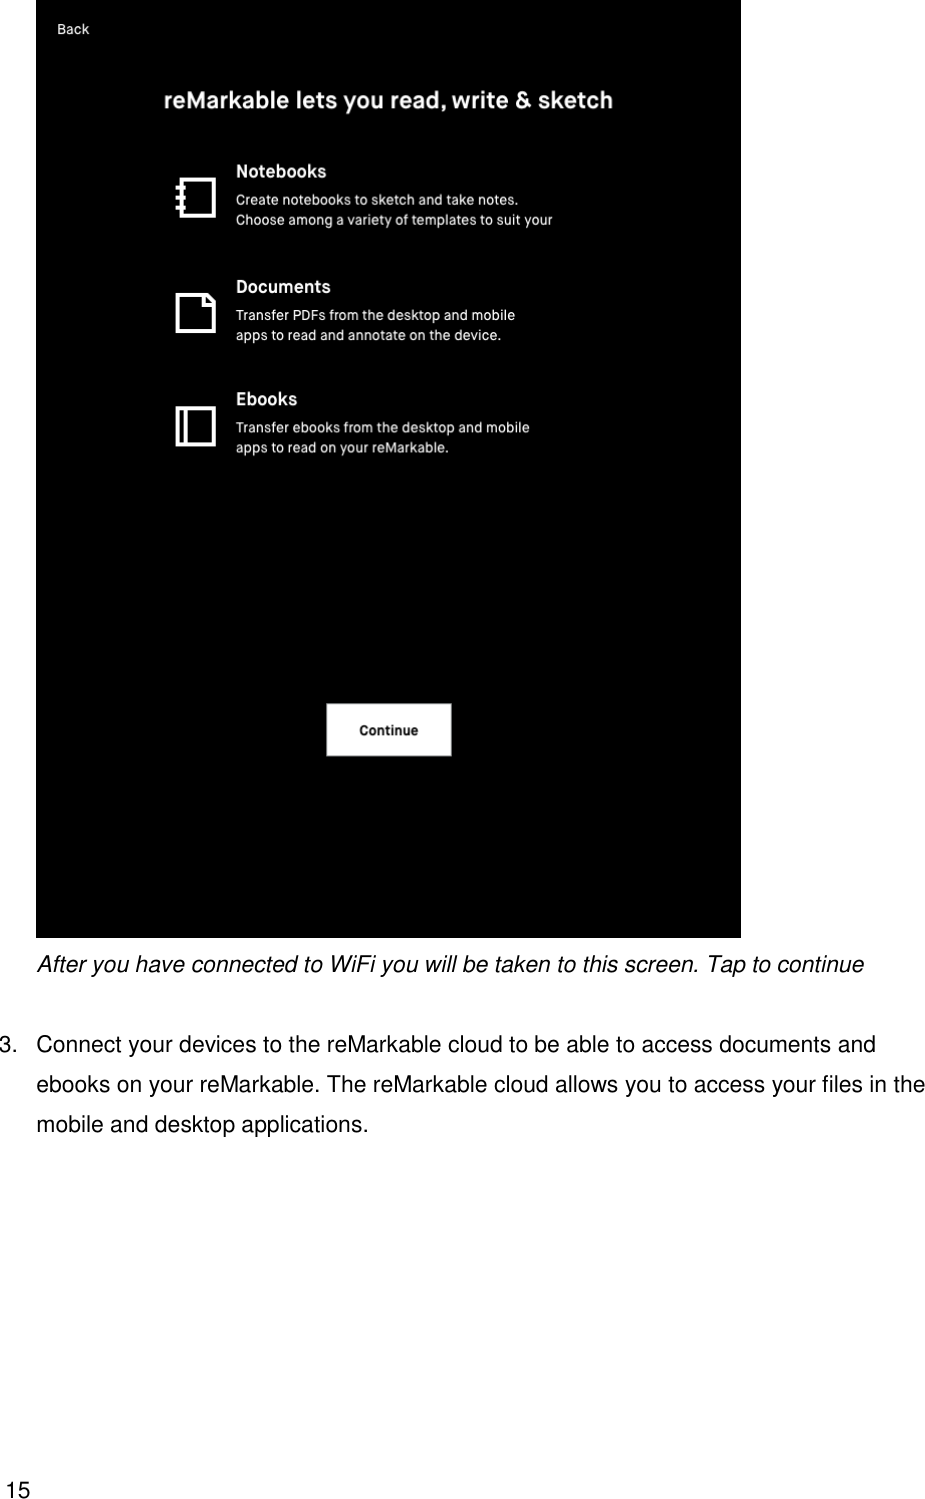 15   After you have connected to WiFi you will be taken to this screen. Tap to continue  3.  Connect your devices to the reMarkable cloud to be able to access documents and ebooks on your reMarkable. The reMarkable cloud allows you to access your files in the mobile and desktop applications.    